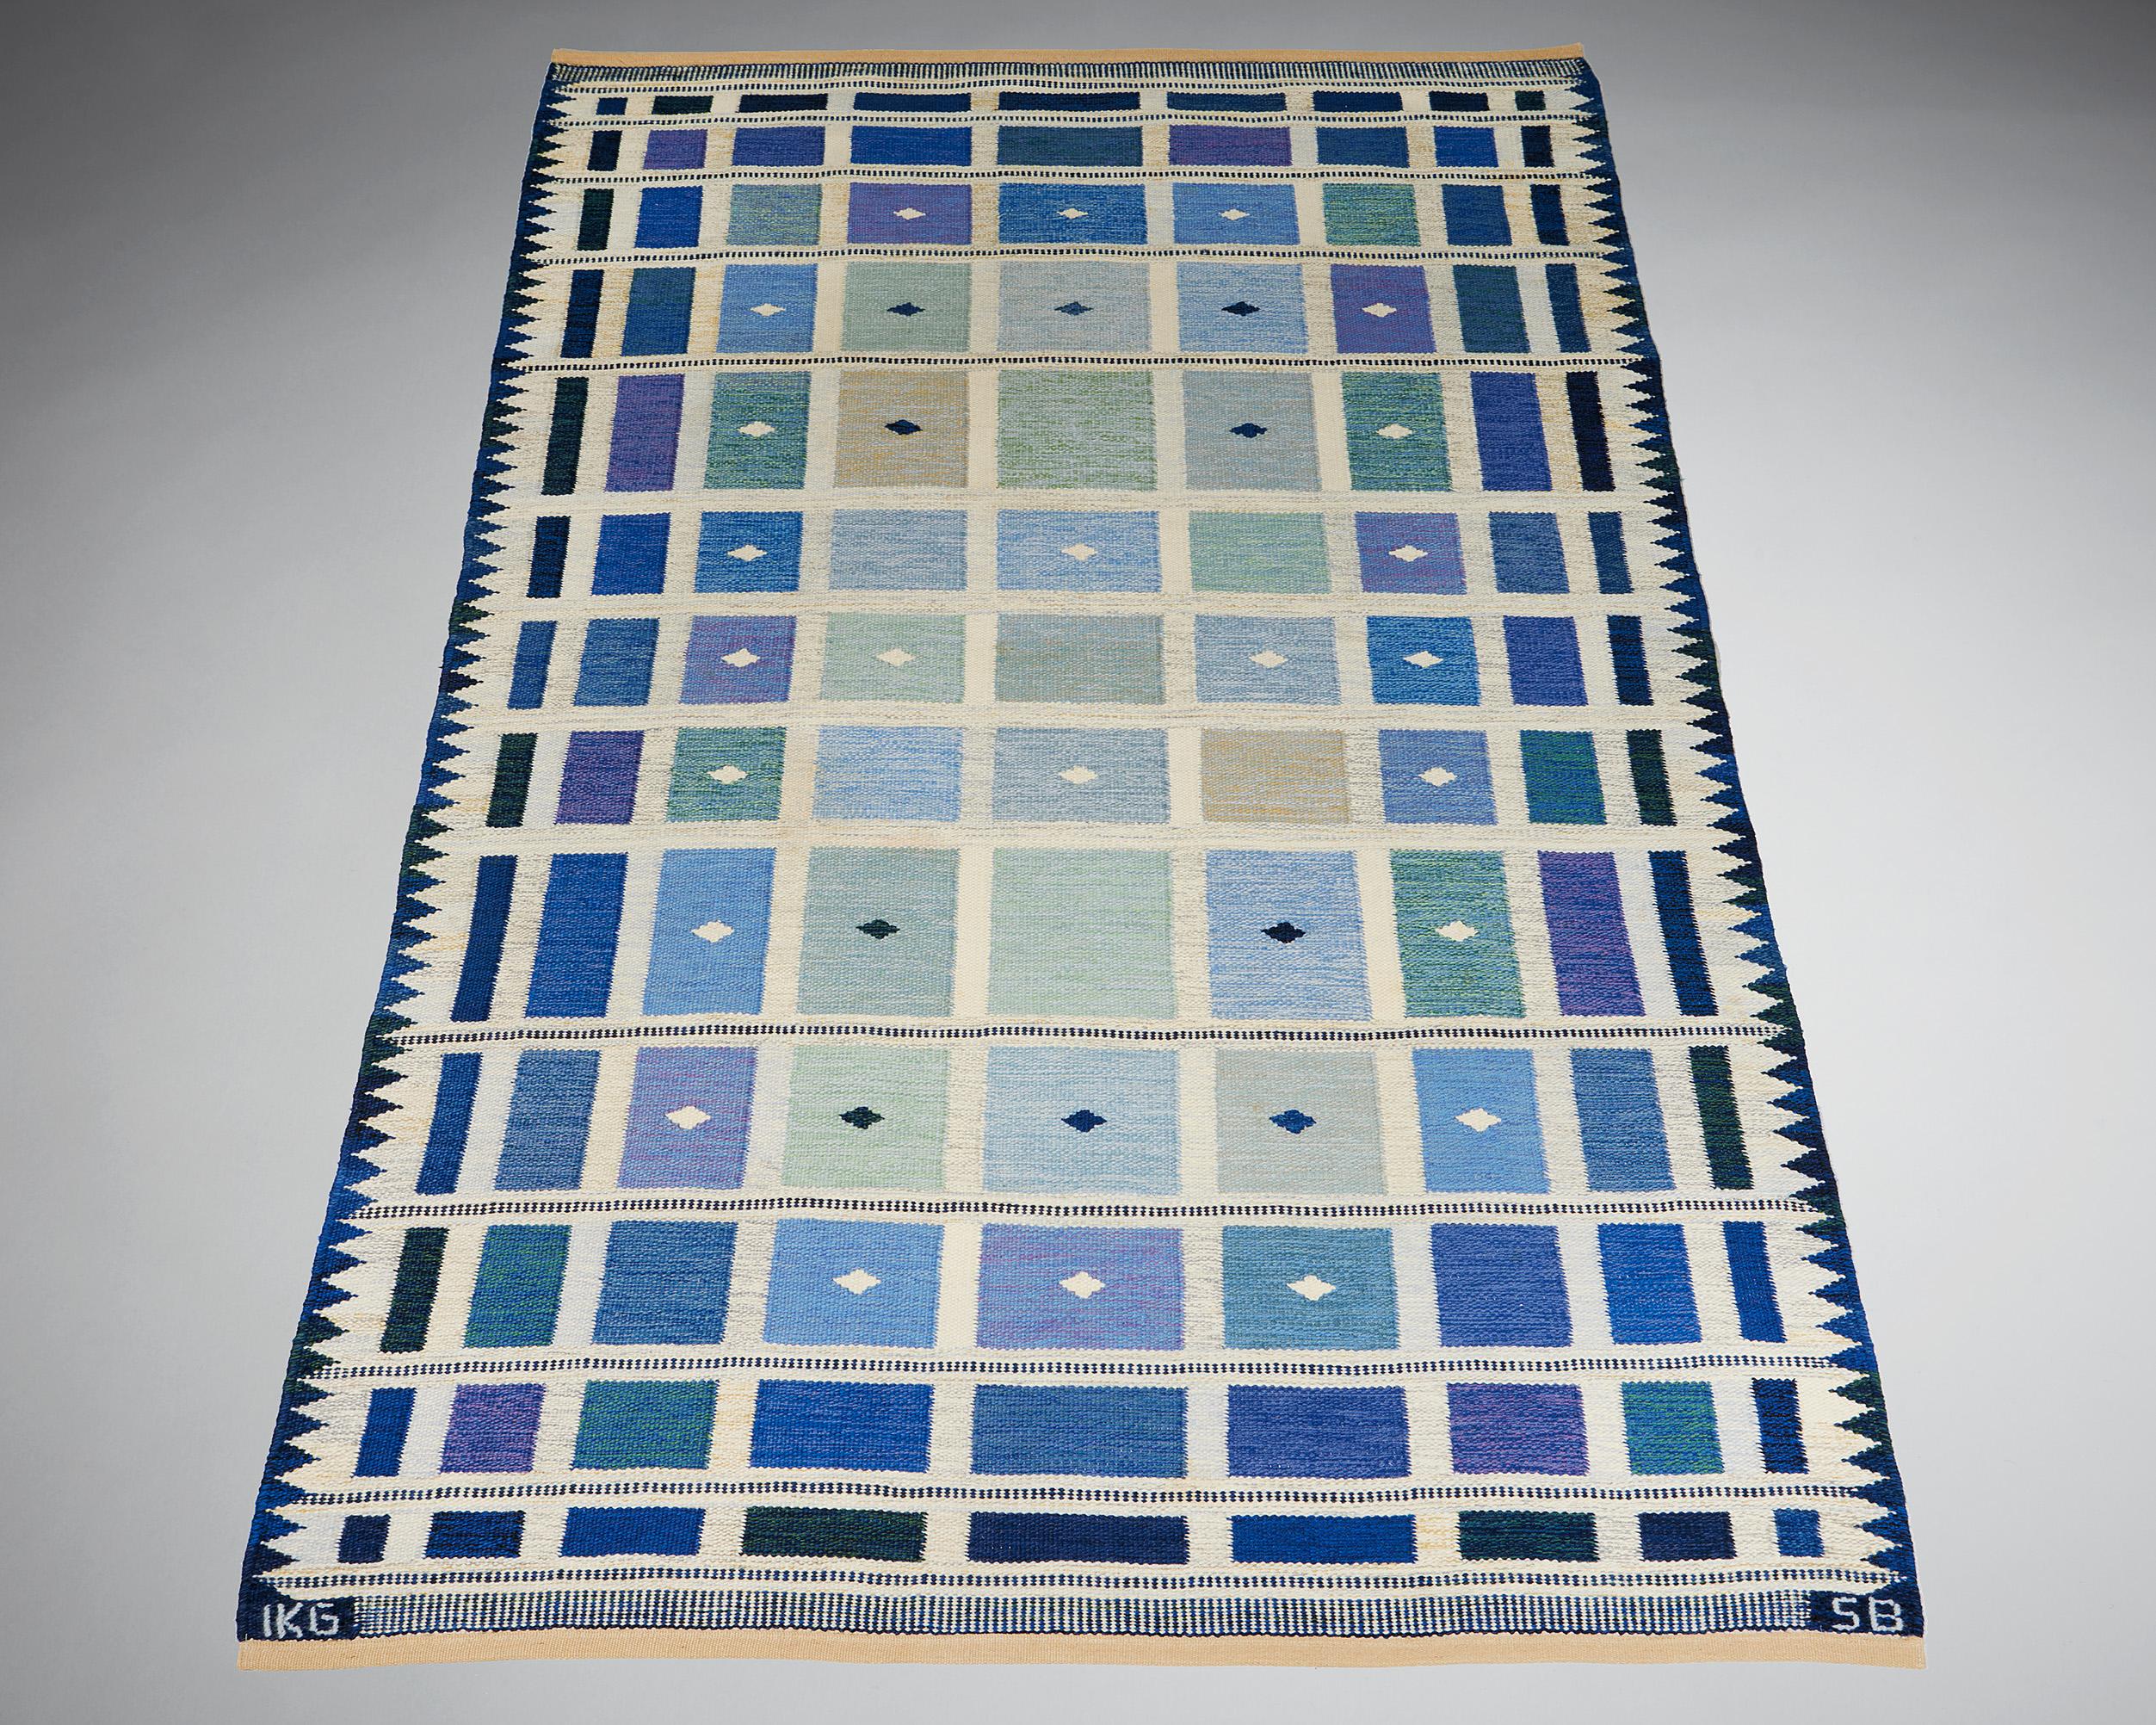 Rug designed by Sigvard Bernadotte,
Sweden. 1950s.

Wool.

Rölakan technique.

This eye-catching rug was designed by Sigvard Bernadotte in Sweden during the 1950s. The textile was woven into a pattern comprised of geometric squares in various shades